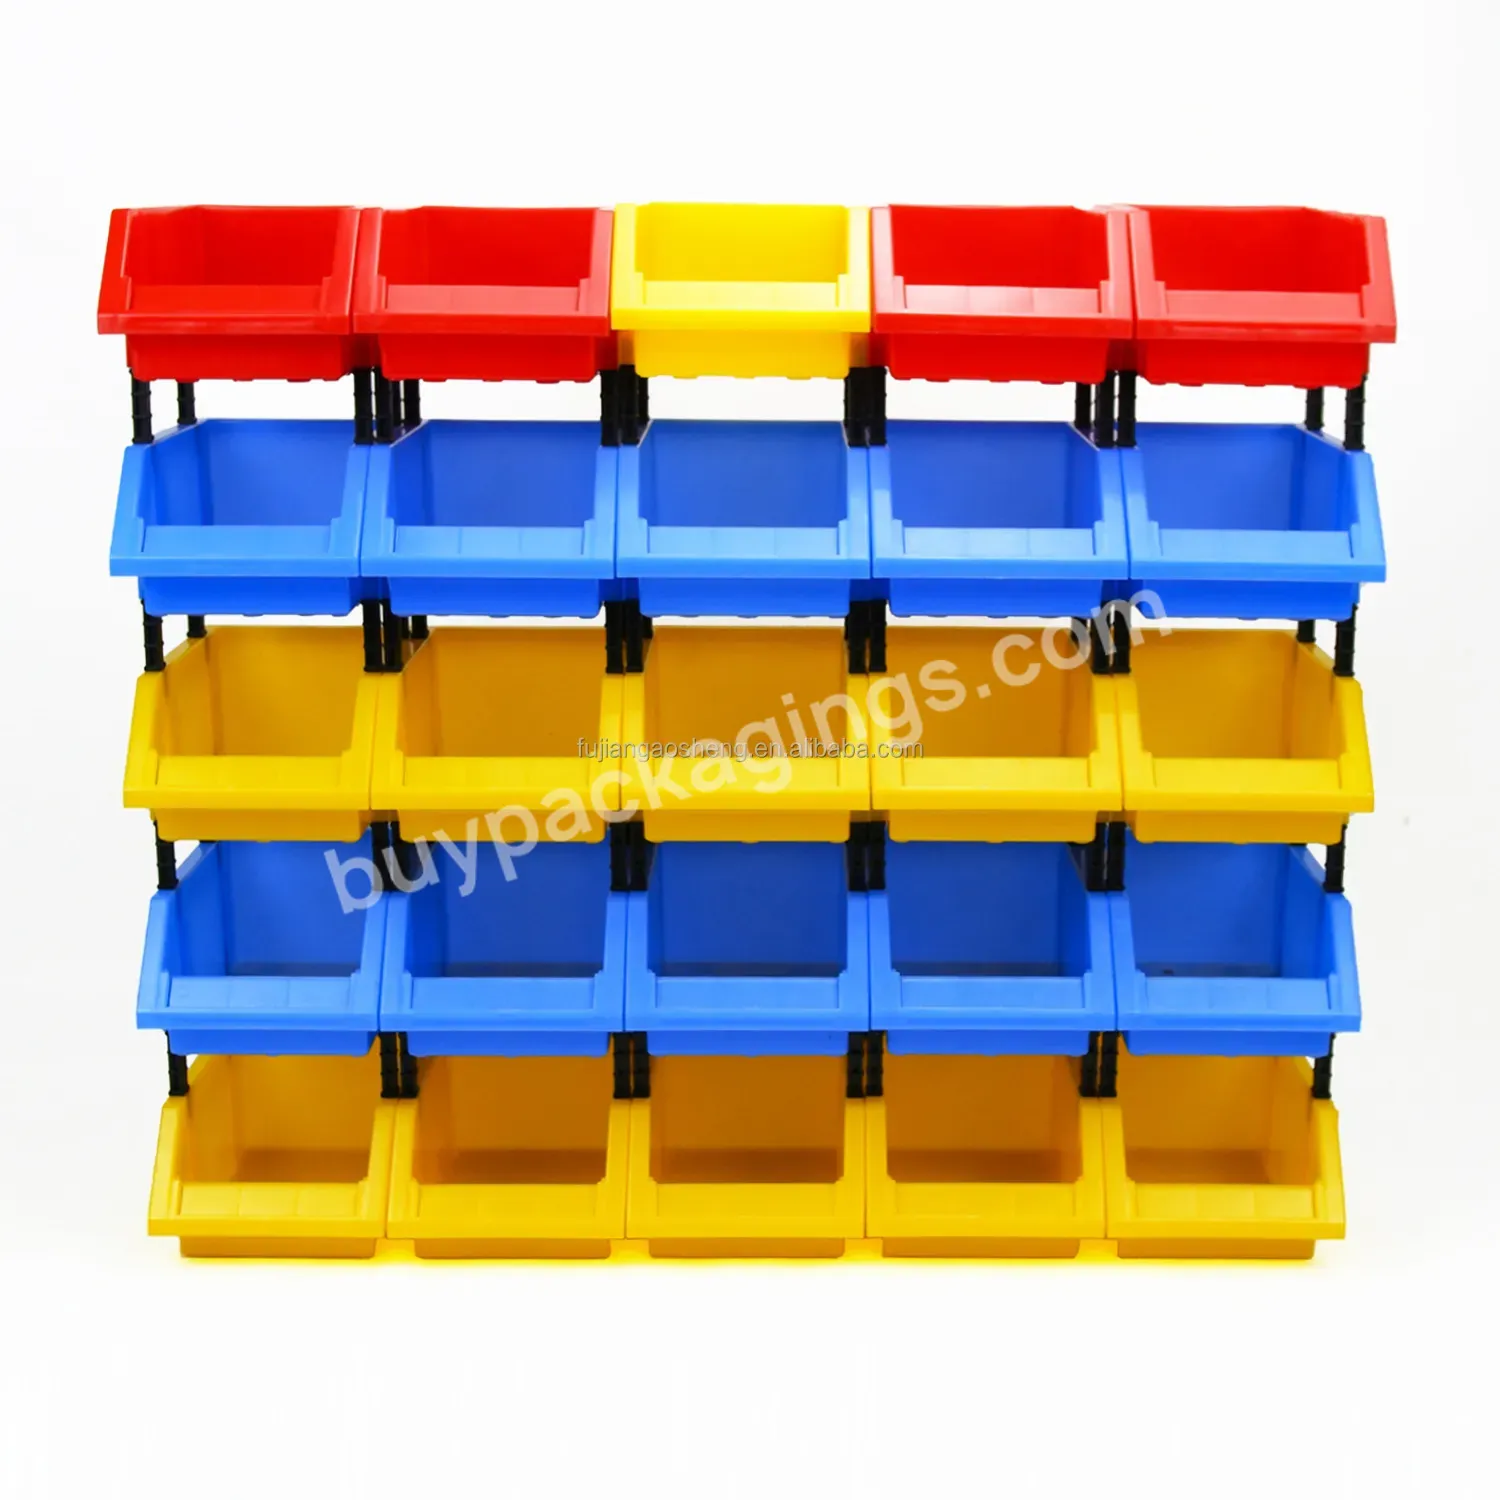 Shelf Bins Cheap Price For Industrial Plastic Portable Boxes Plastic Stackable And Divisible Storage Shelf Bins - Buy Kids Plastic Storage Bins,Cheap Plastic Storage Bins,Stackable Bread Bin.